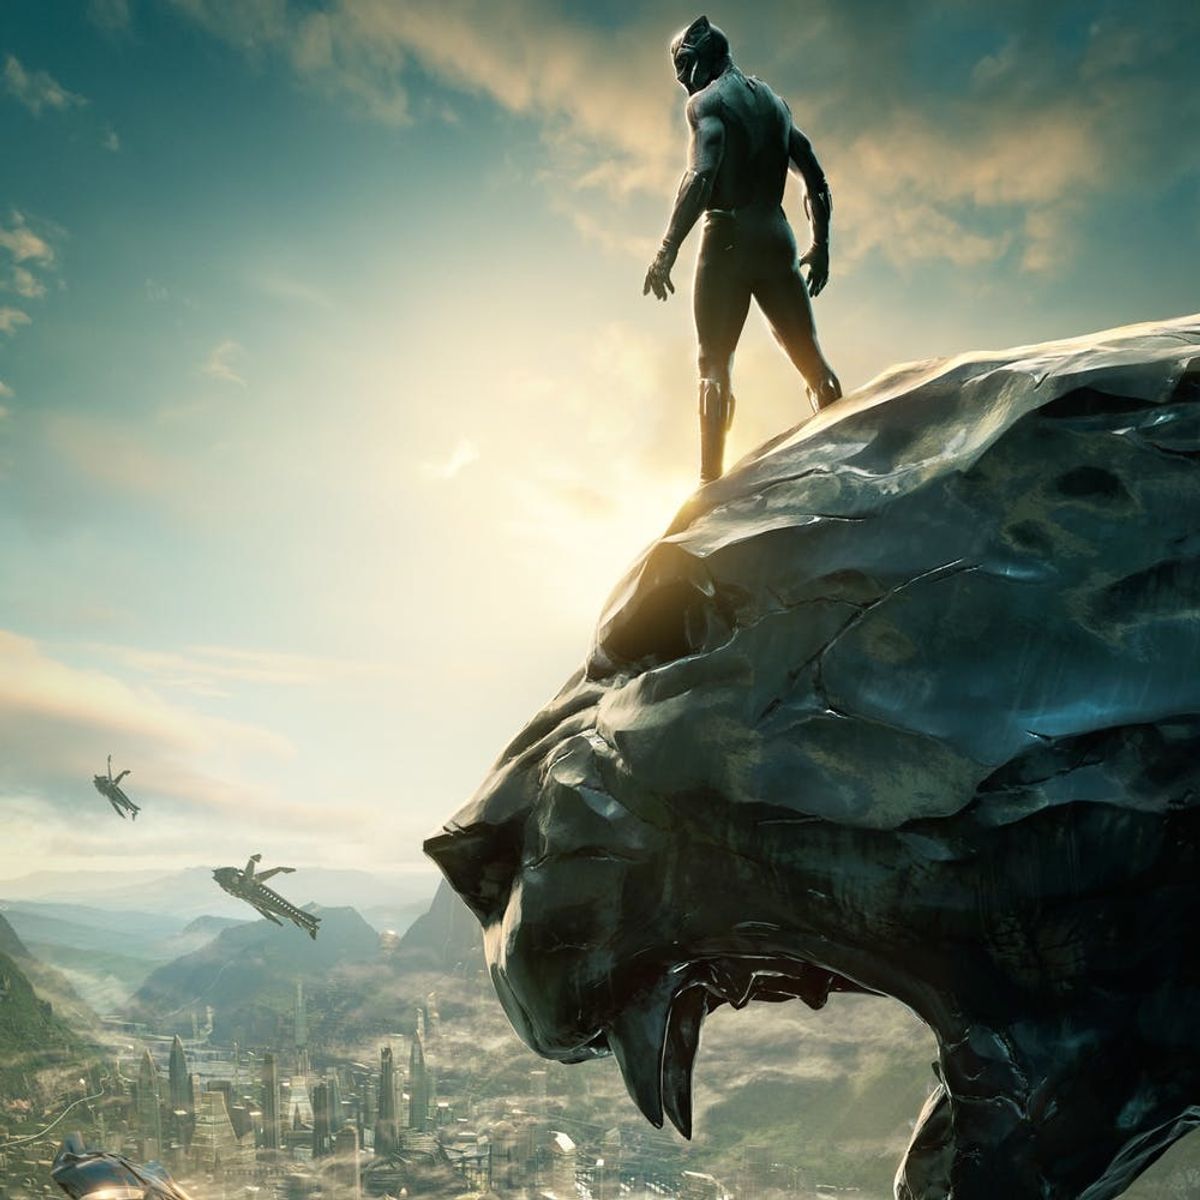 Critics Can’t Stop Gushing About the New ‘Black Panther’ Movie